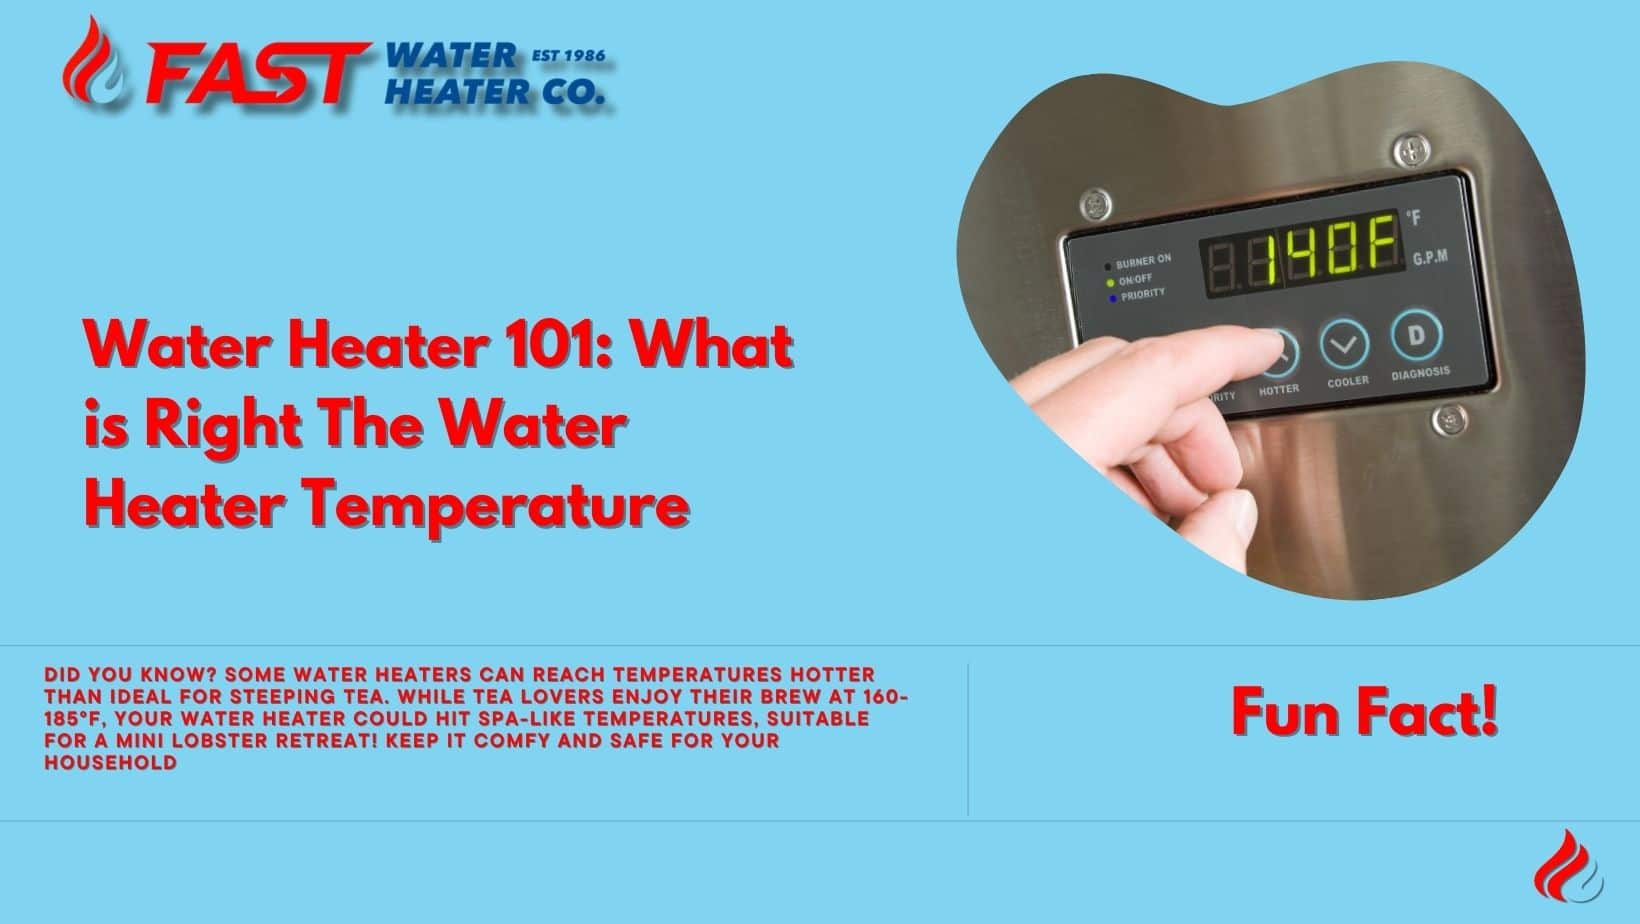 Water Heater 101: What is Right The Water Heater Temperature